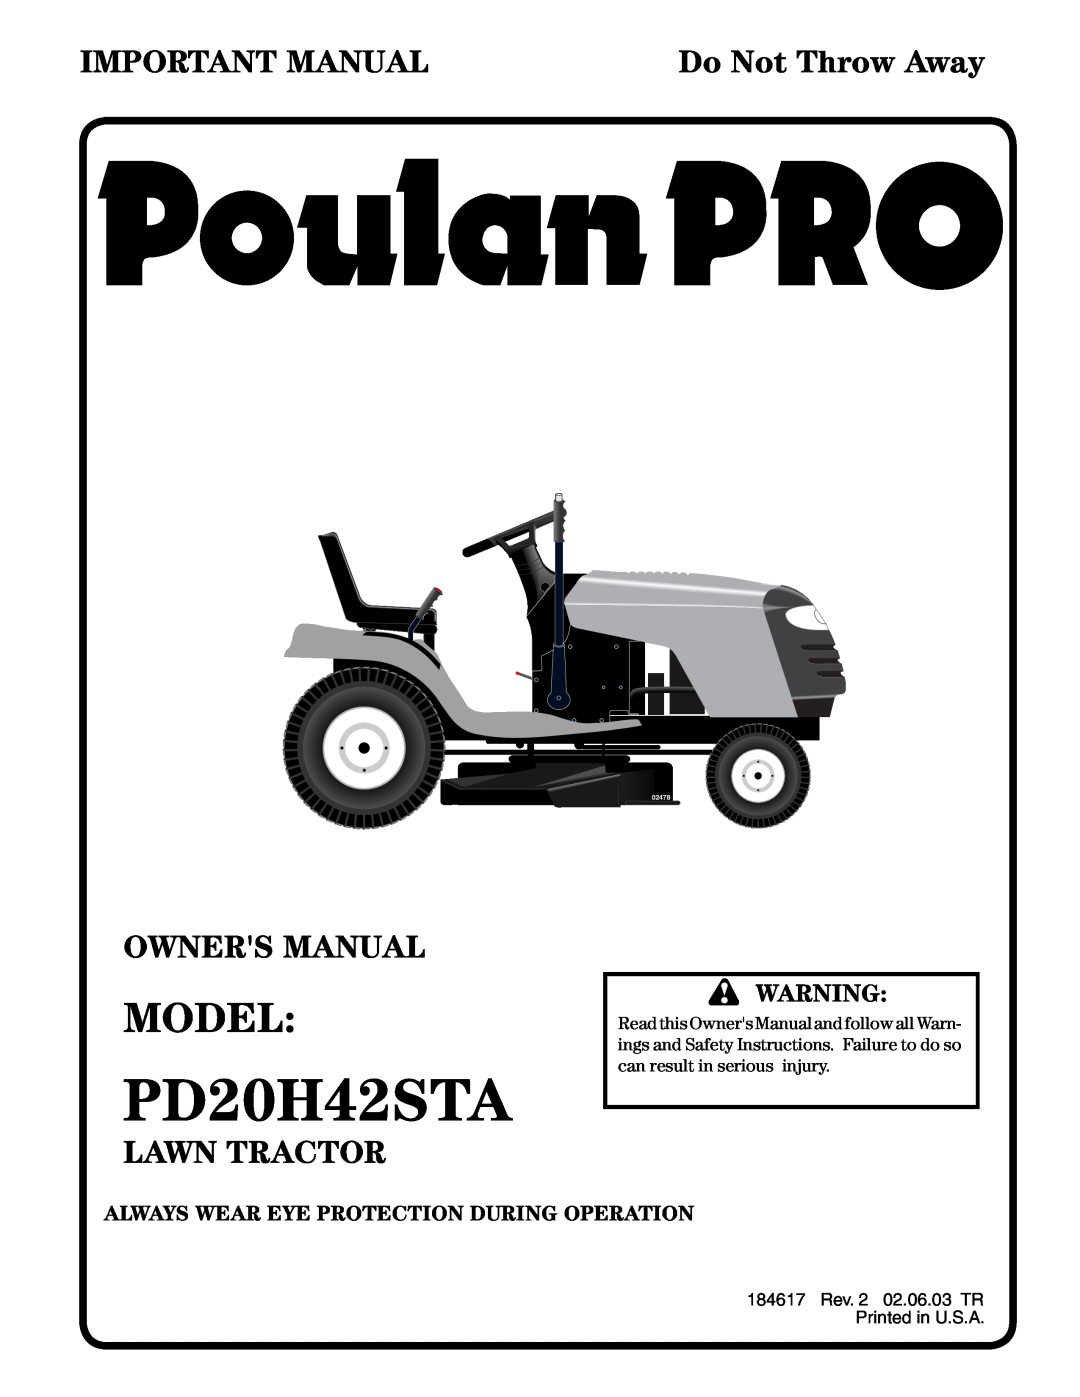 Poulan 184617 owner manual Model, PD20H42STA, Important Manual, Lawn Tractor, Do Not Throw Away, 02478 